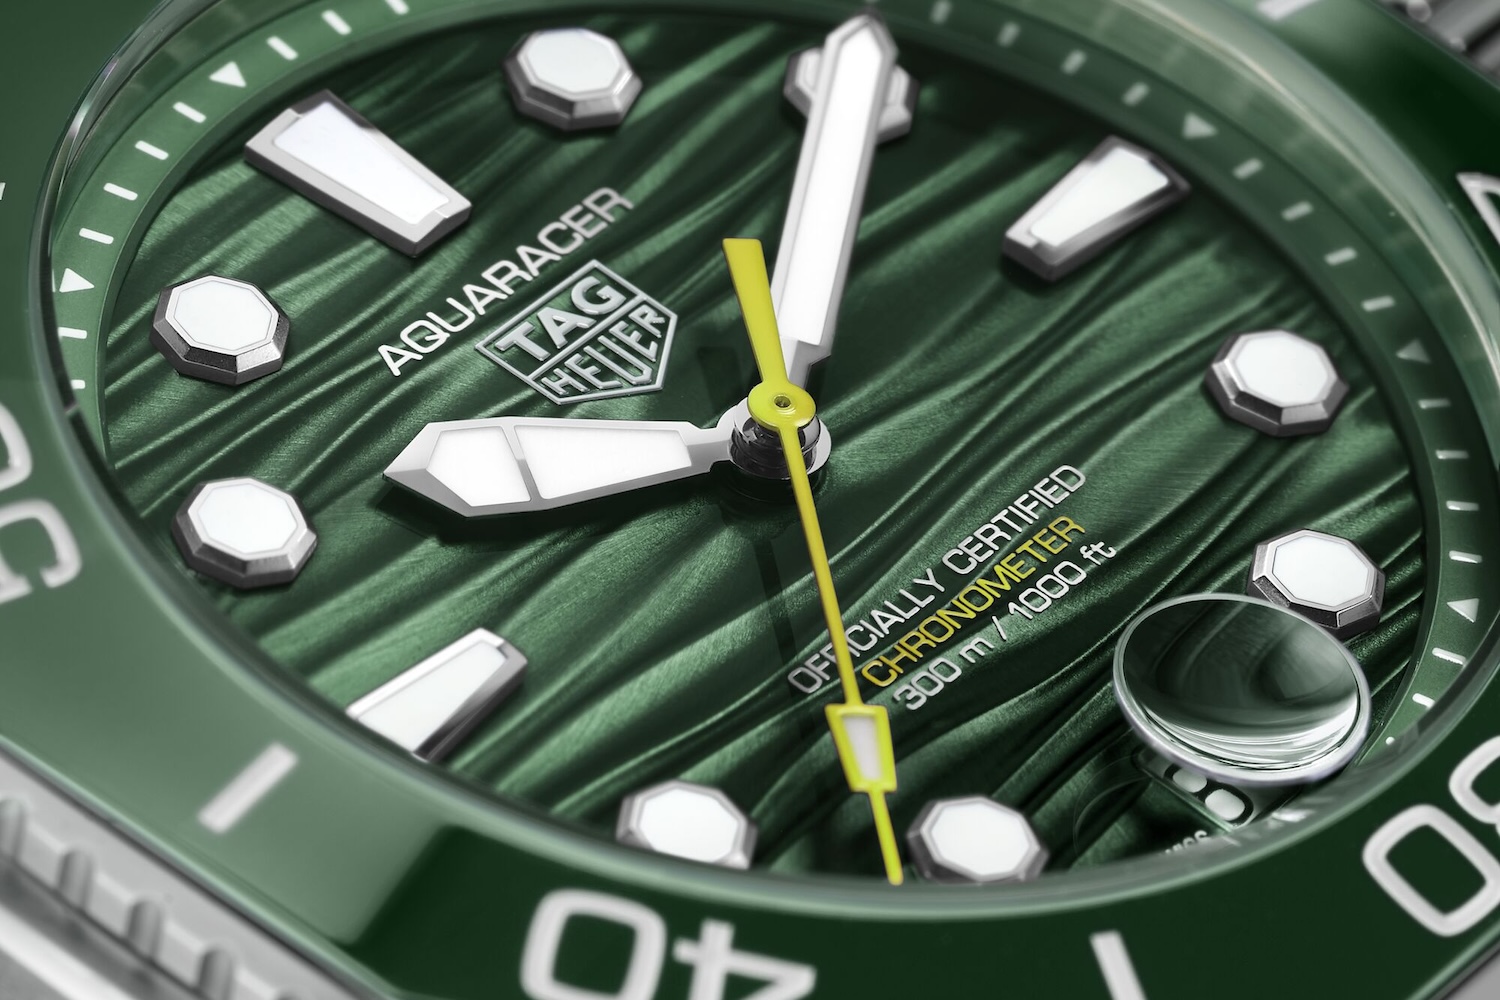 The face of TAG Heuer's Aquaracer Professional 300 in jade.